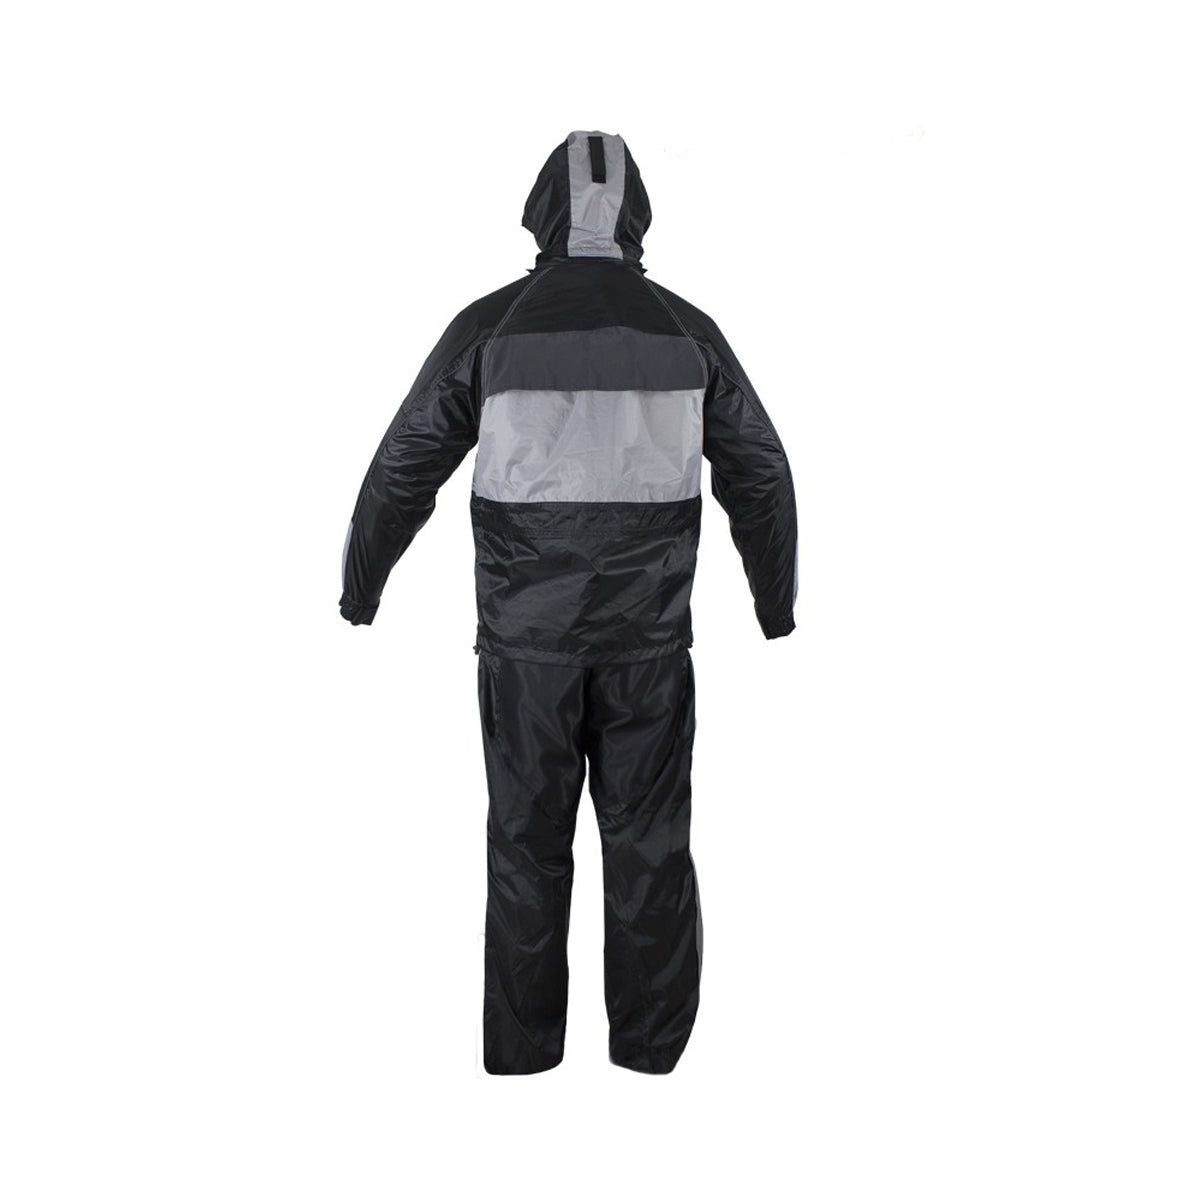 Two-Piece Black & Gray Rain Suit With Zippered Side Seams